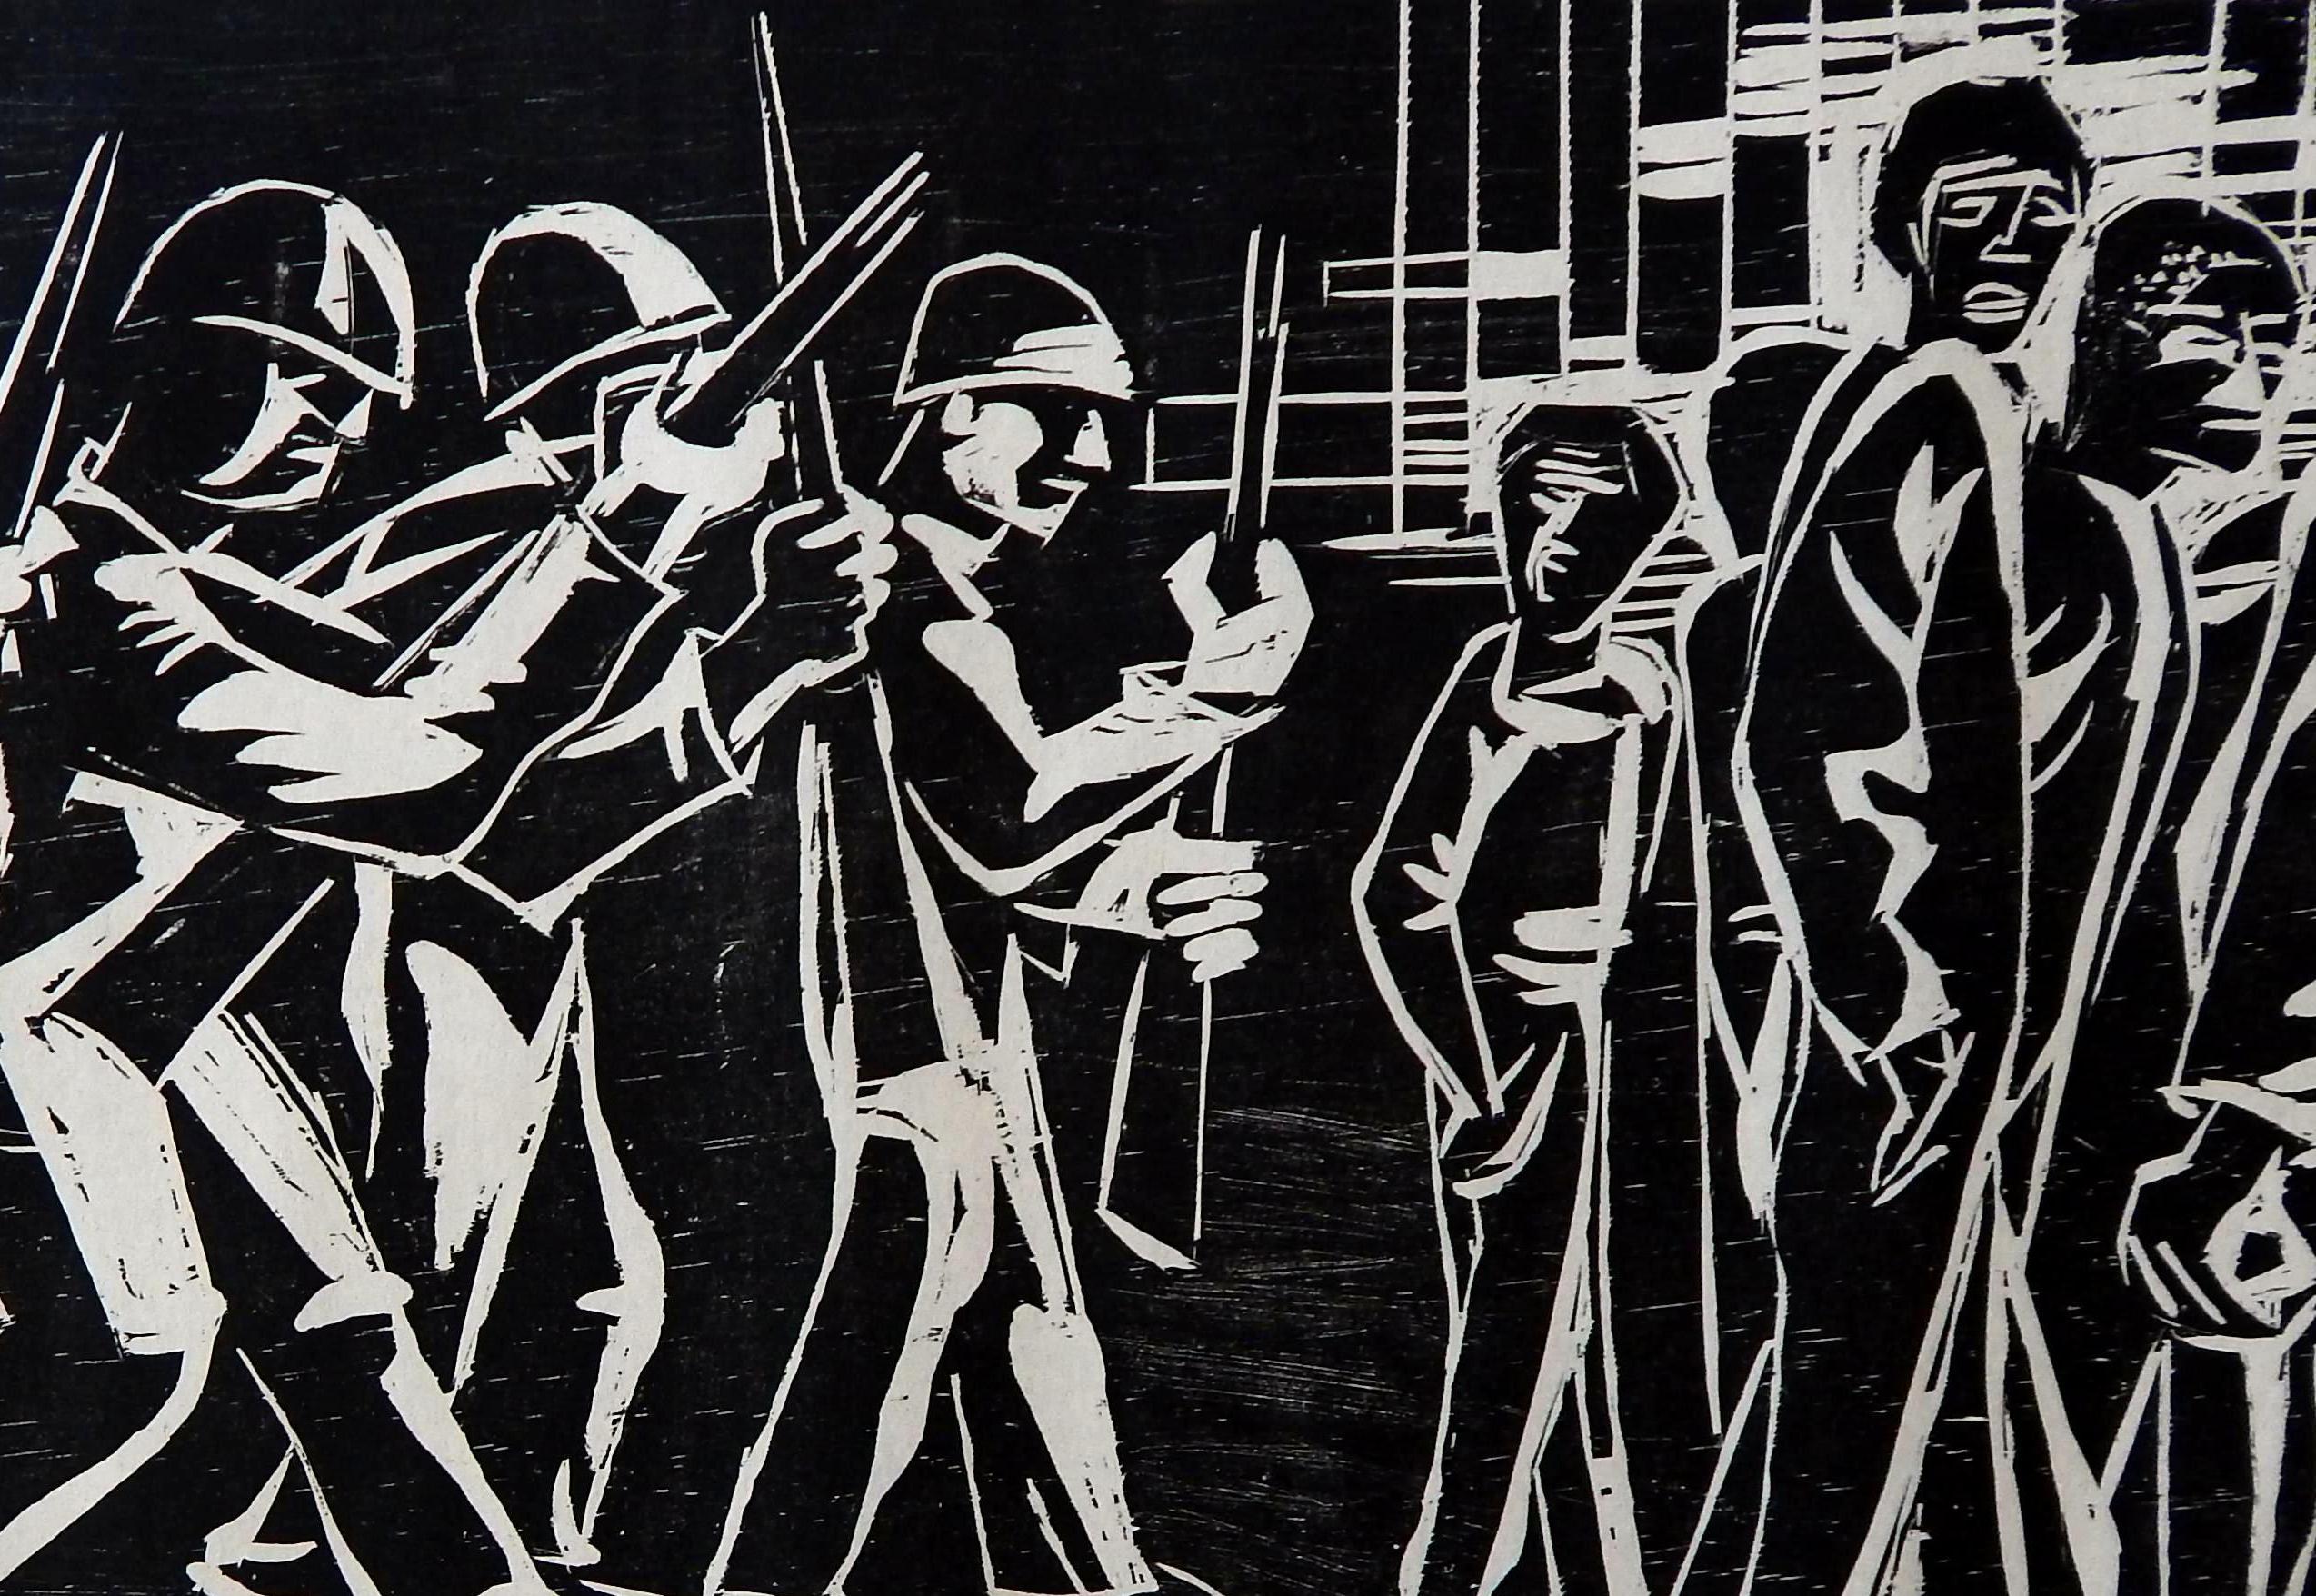 An original woodcut print depicting the social unrest of the 1960s by Herman Roderick Volz. 
Pencil signed by the artist lower right. Image measures 14